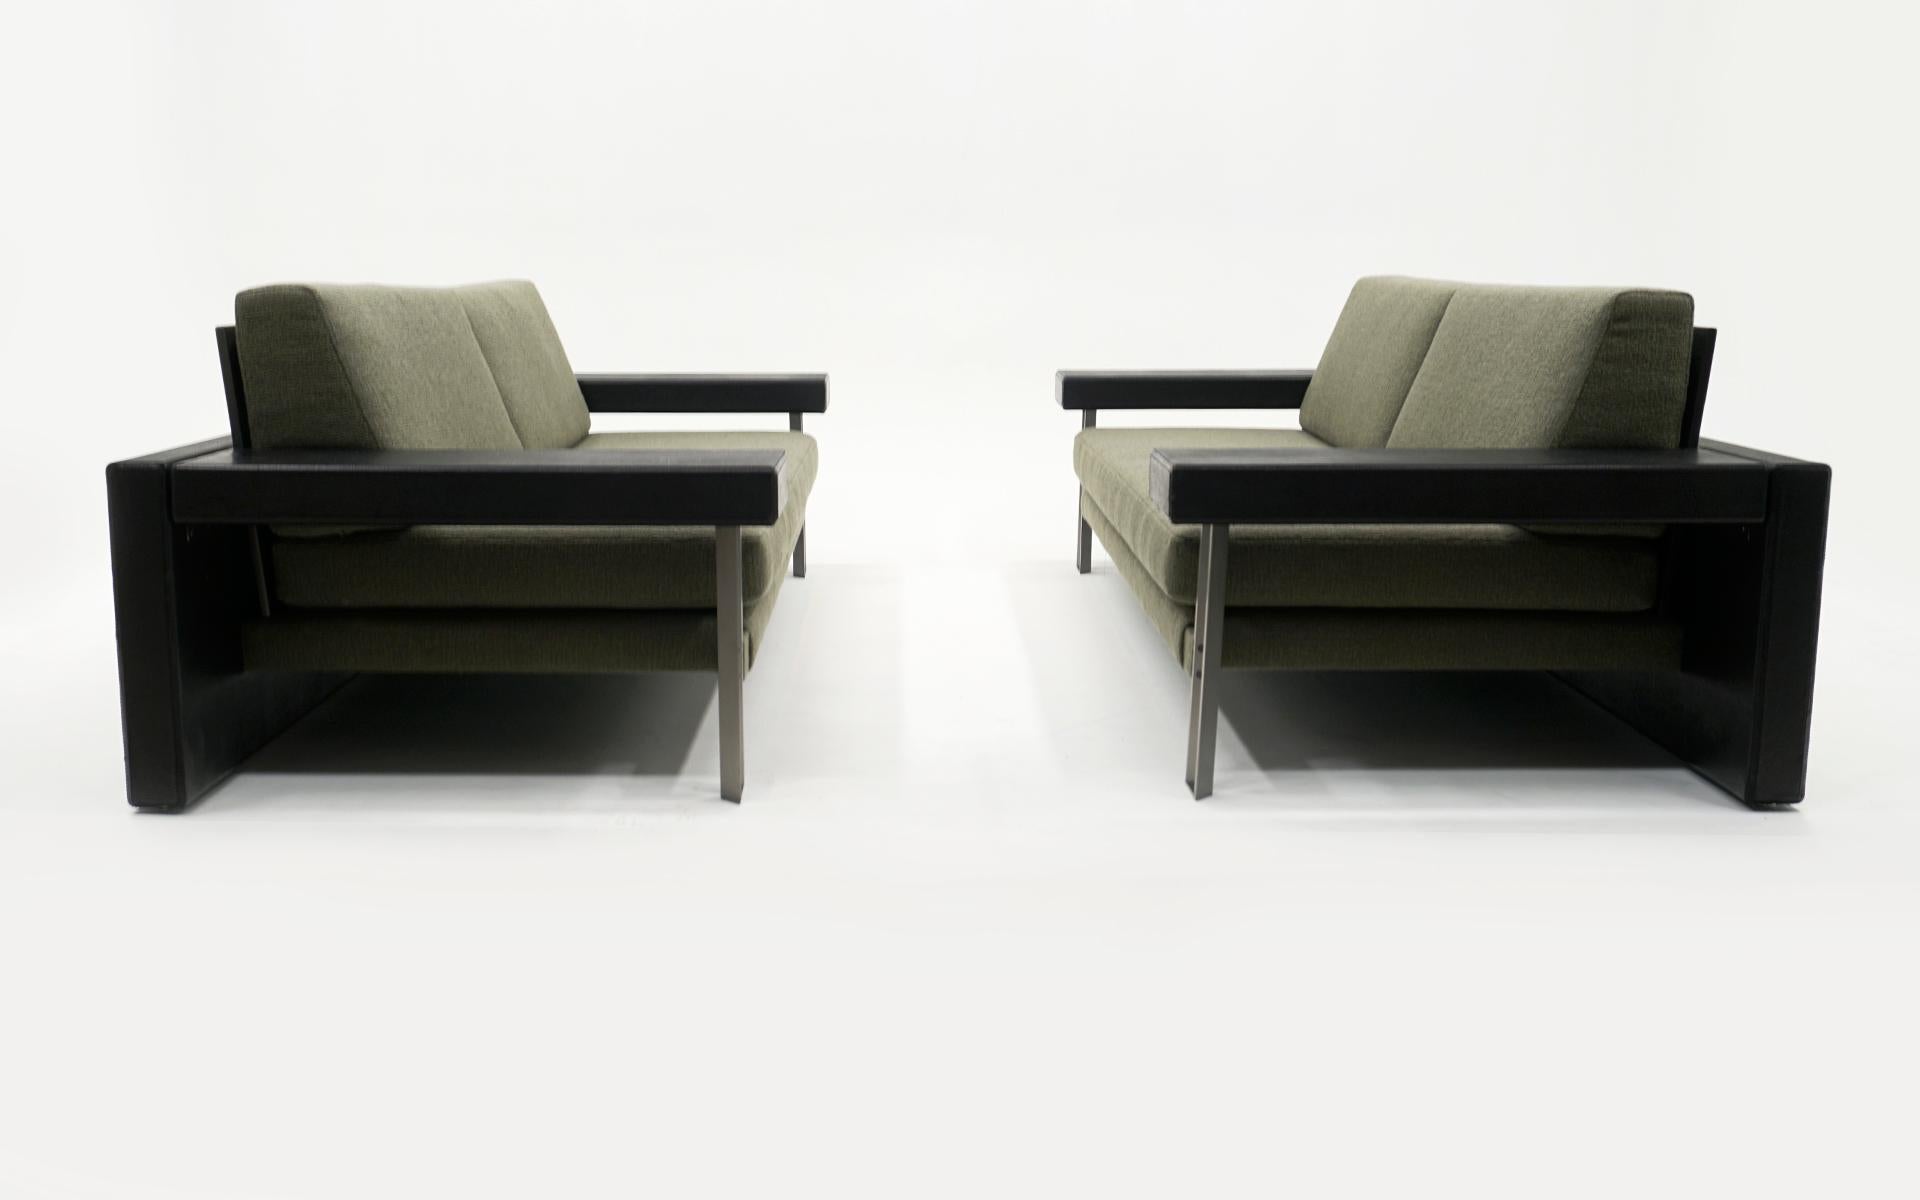 Italian Pair of Sofas by Giovanni Offredi for Saporiti, Italy, 1970s.  Ready to Use. For Sale